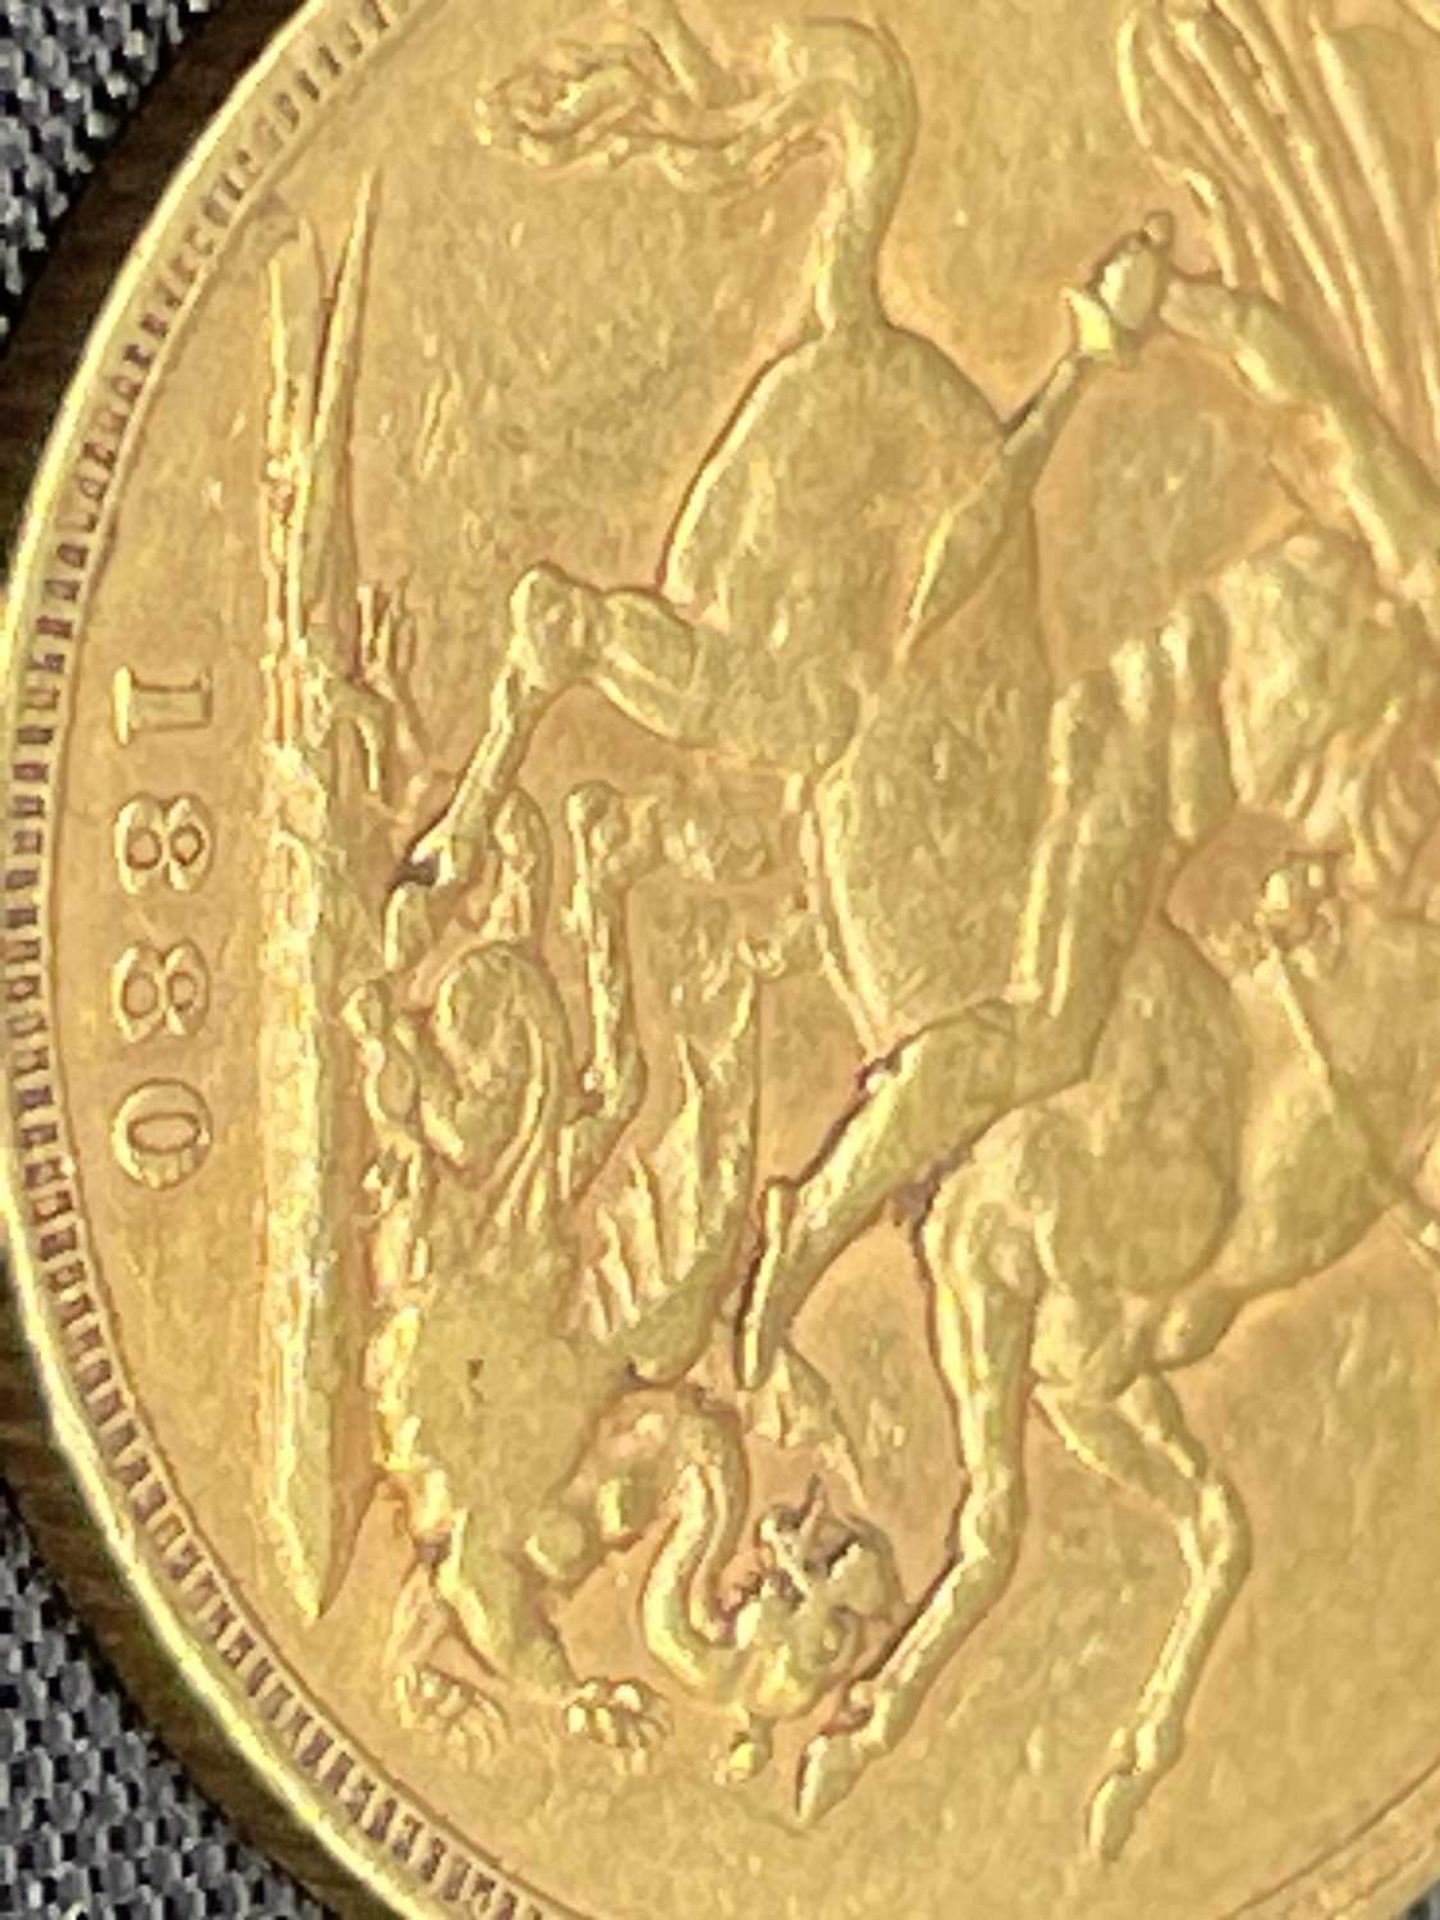 Great Britain Gold Sovereign 1880 George & Dragon Condition: please request a condition report if - Image 4 of 4